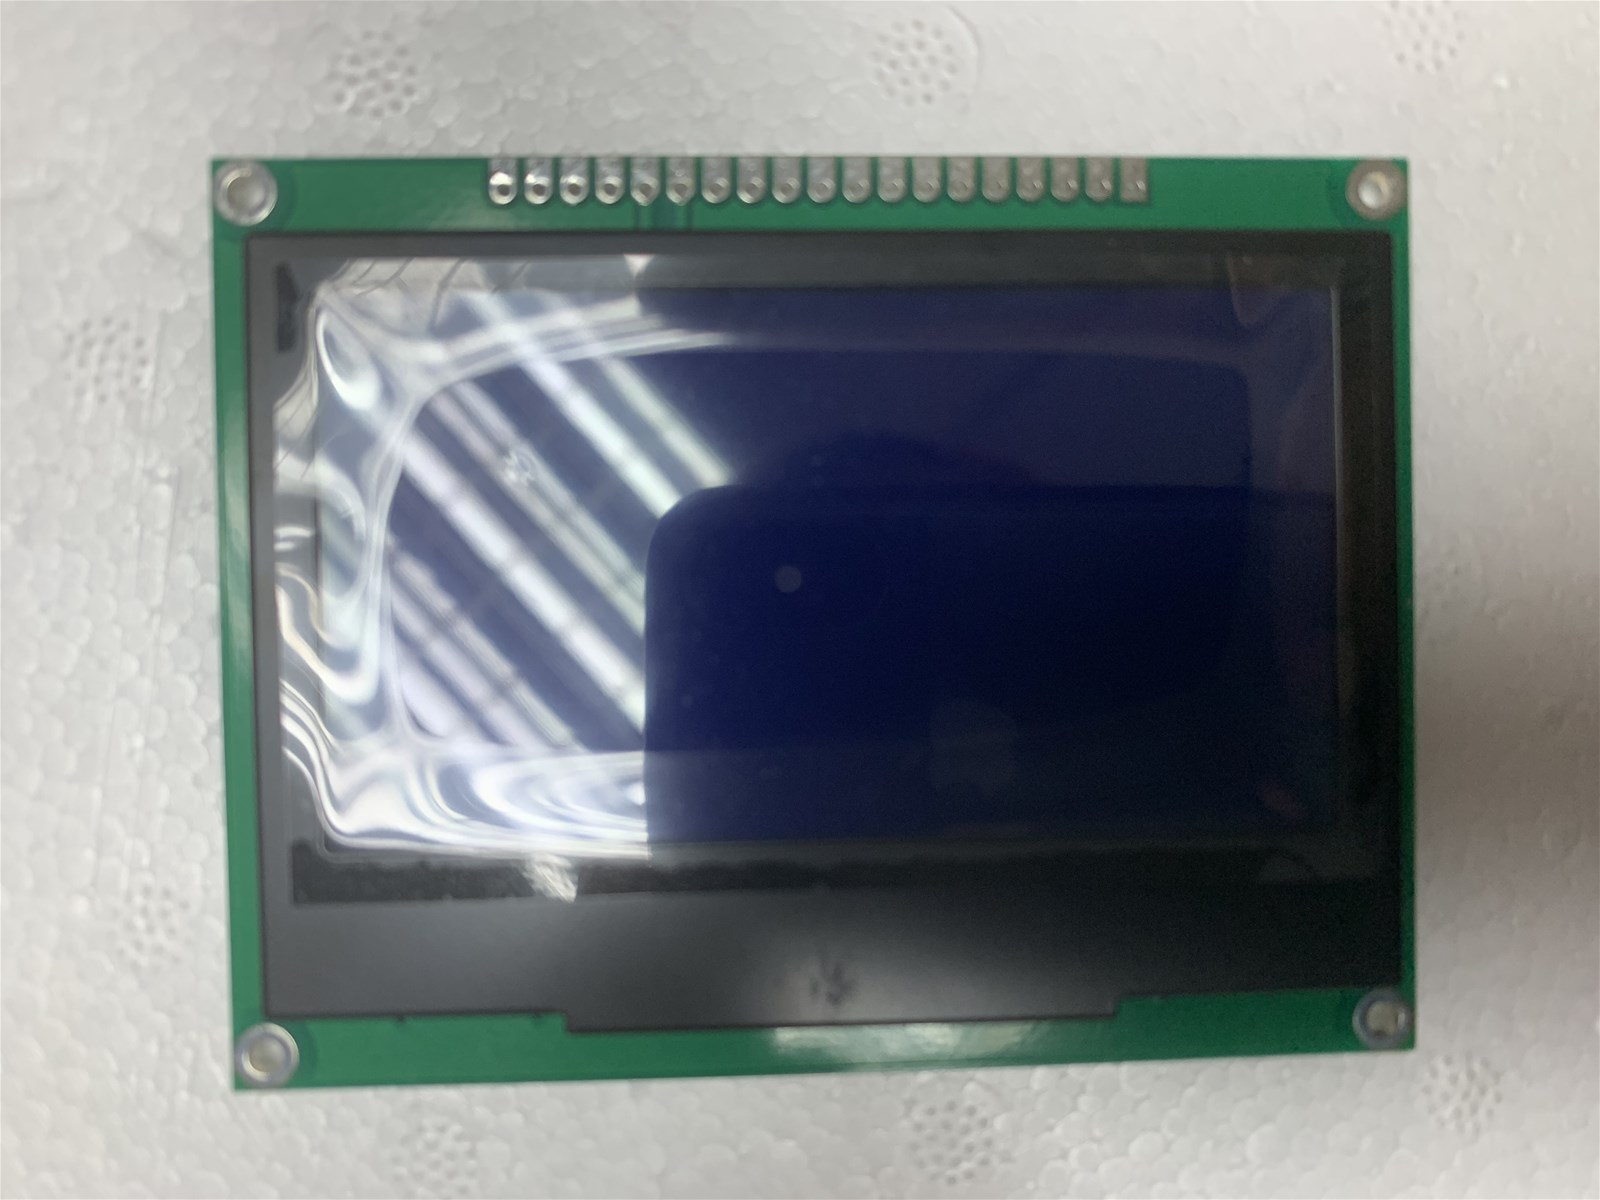 128x64 Graphic LCD Display COG Type LCD Module DISPLAY